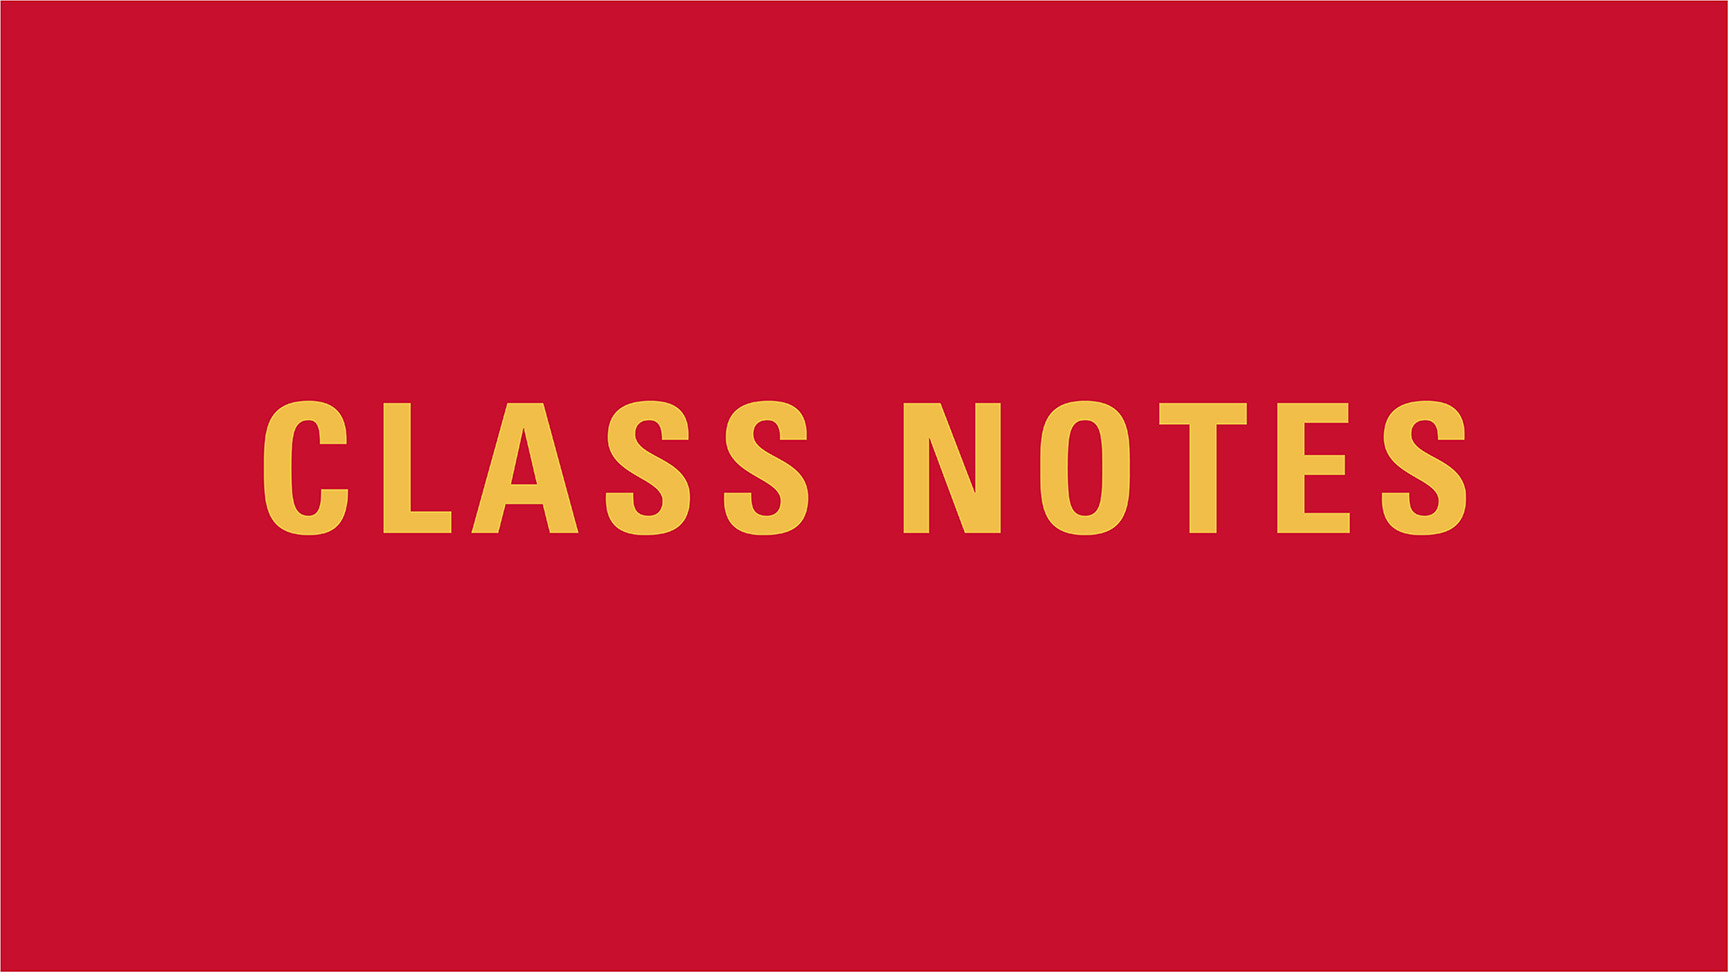 Class Notes graphic